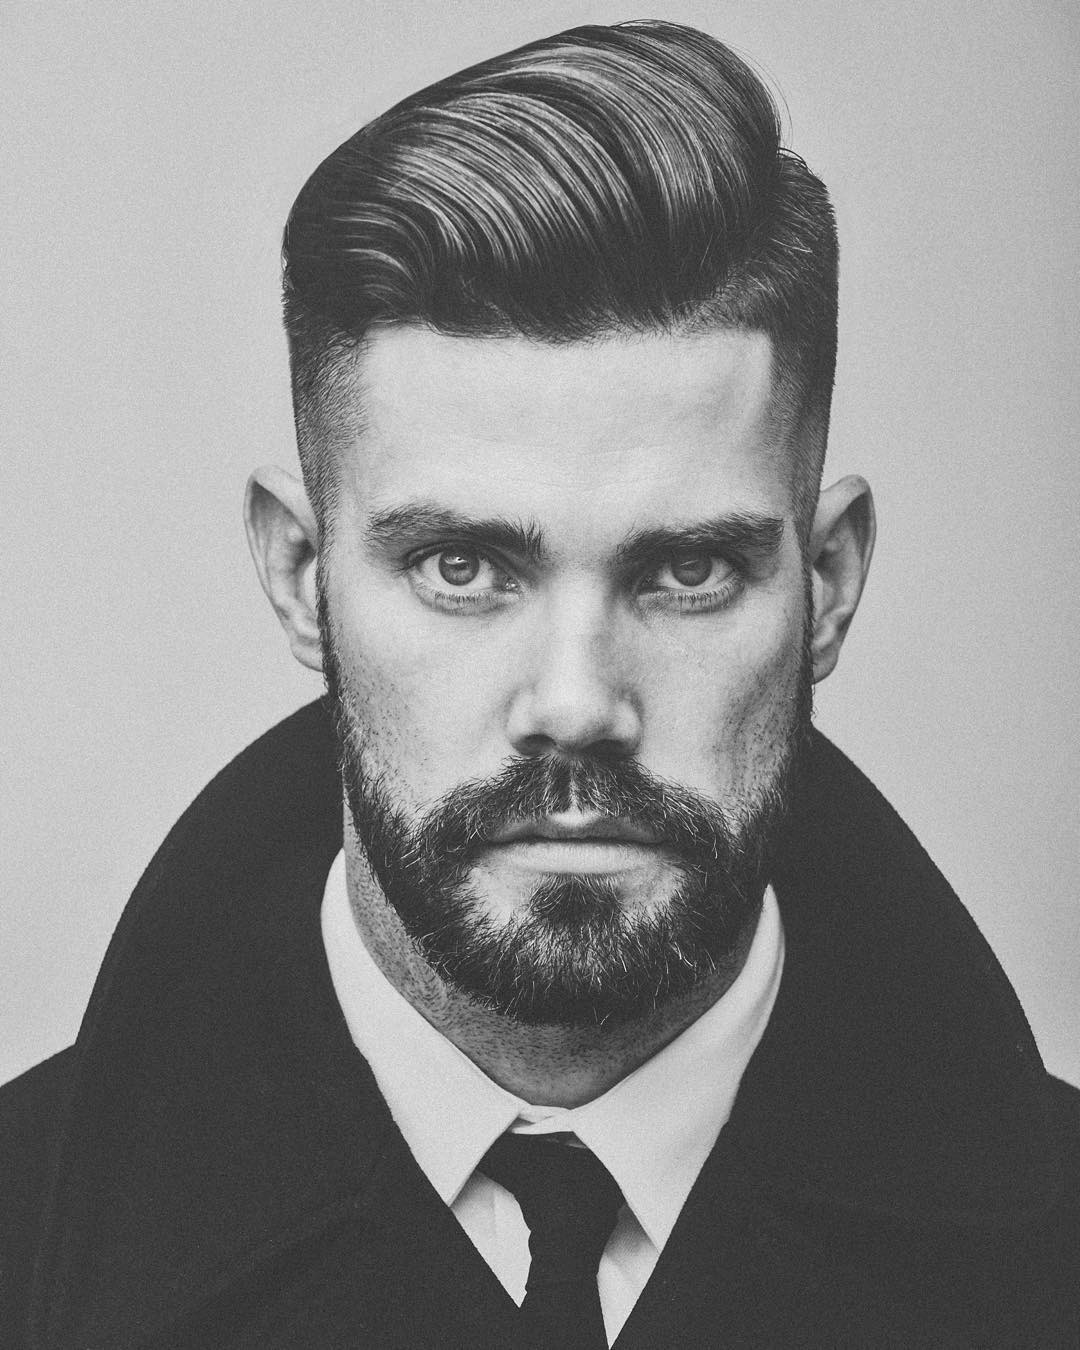 85 Wonderful Short Haircuts for Men - [Be Yourself in 2019]